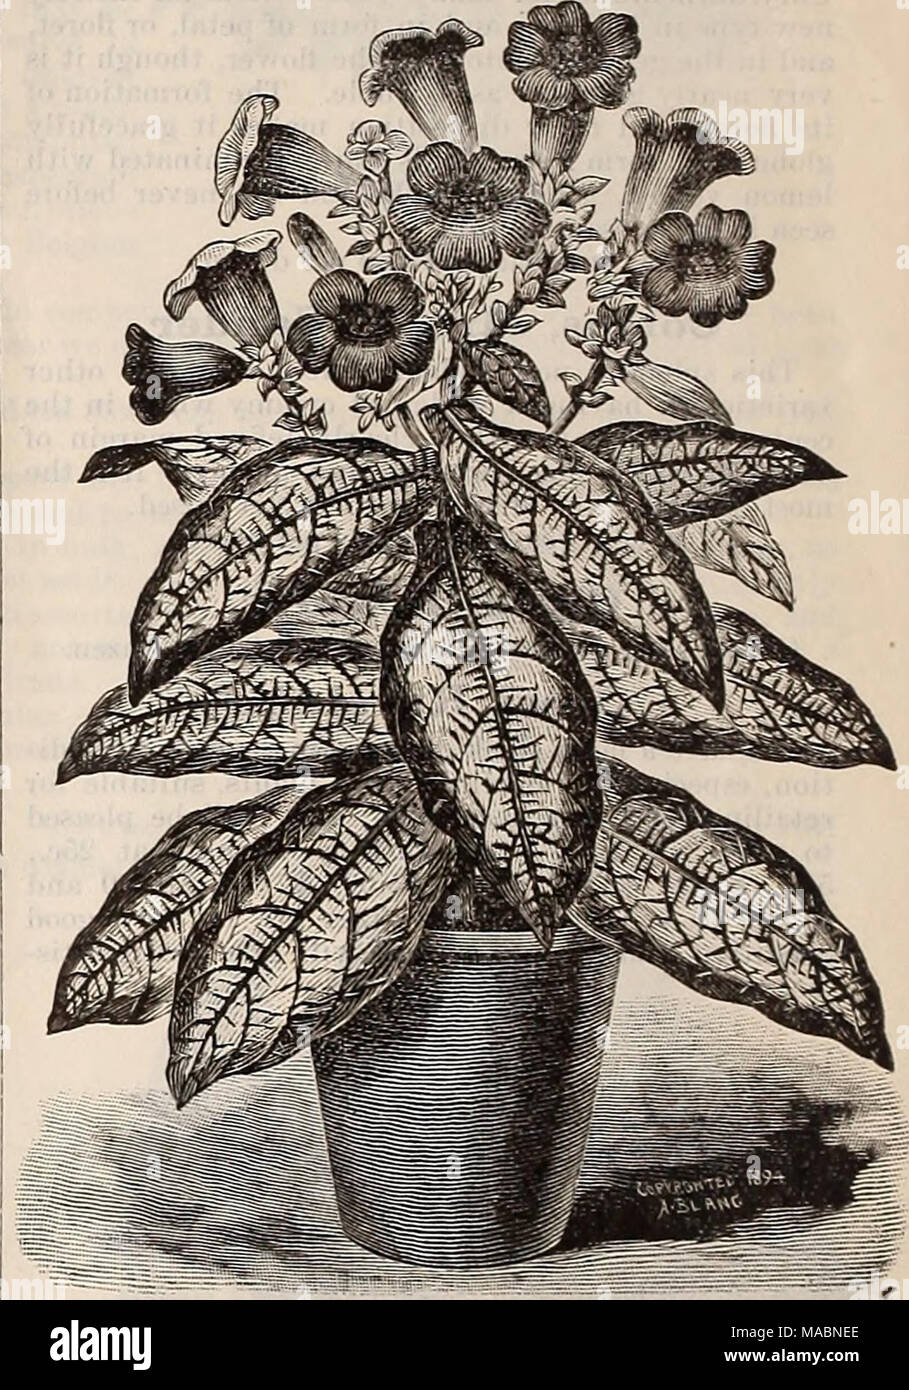 . Dreer's quarterly wholesale price list of seeds, plants, bulbs, &amp;c. : summer edition July 1895 August . Strobilaxthe; DYIlRIANI'S. Strobilanthes Dyerianus. A new and attractive plant suitable for growing in pots for house decoration and for bedding out in the summer ; it forms a compact bush 18 inches high with leaves 6 to 9 inches long and 3 to 4 inches wide, of the most intense metallic purple color, shad- ing into light rose with a light green margin, a combi- nation nuapproached by any other plant. The floweTs are of a violet blue and very pretty. It is said to make an excellent bedd Stock Photo